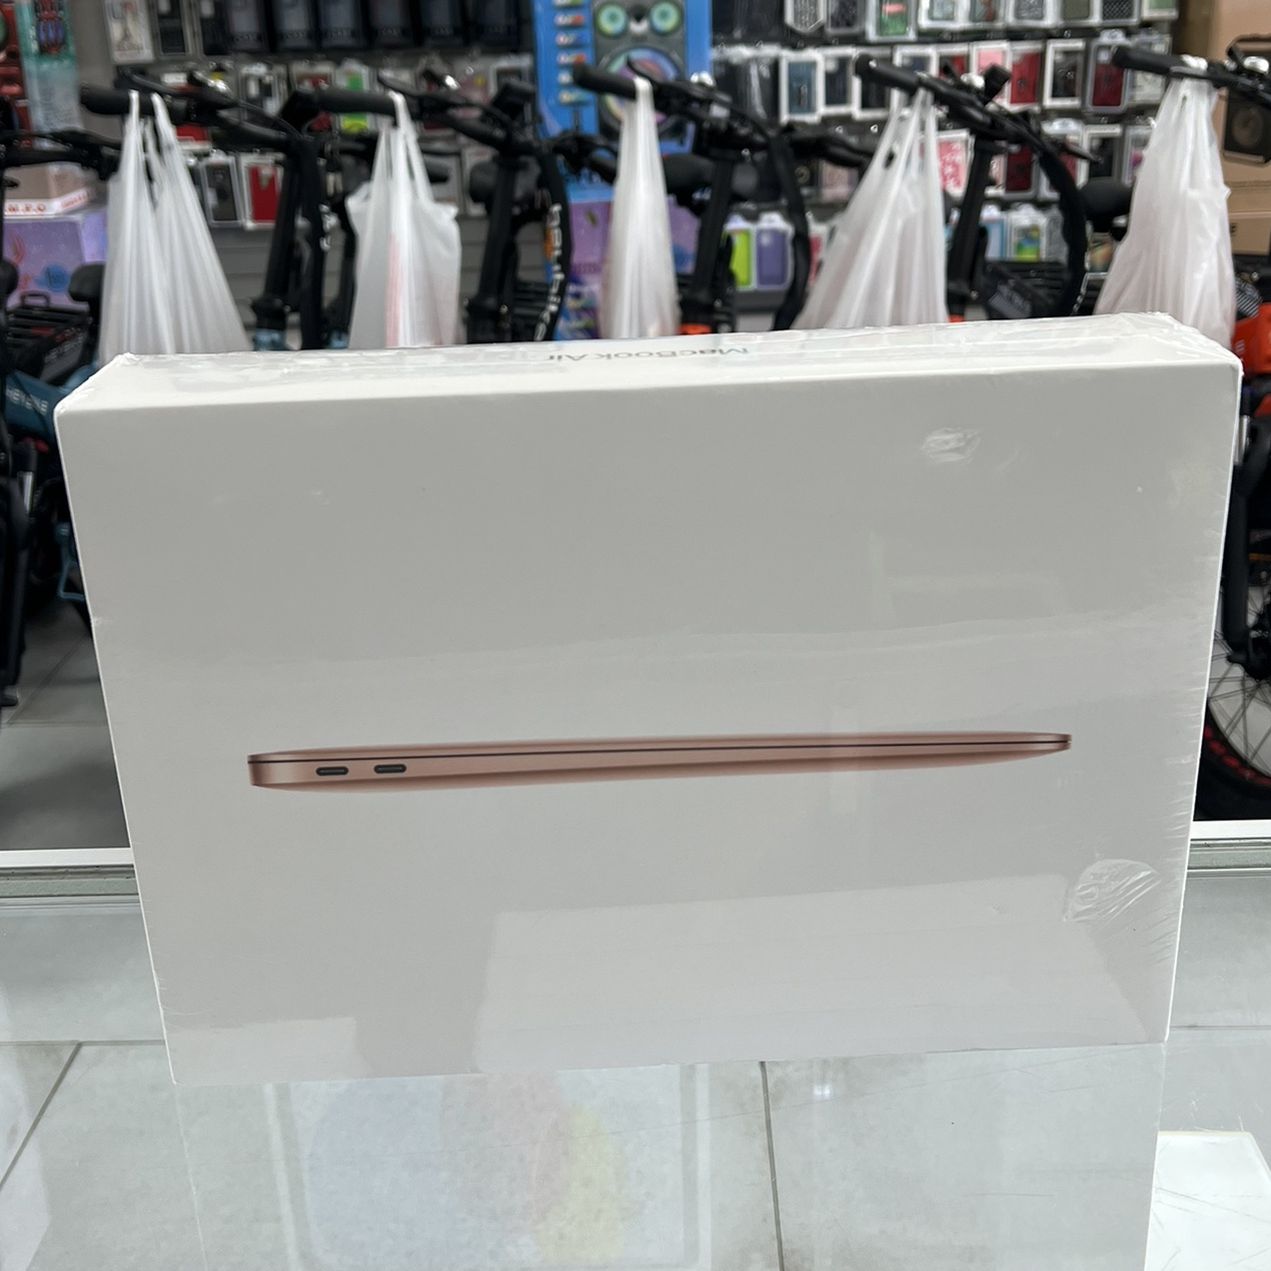 Macbook Air 13” M1 8GB/256GB! Finance For $50 Down Payment!!